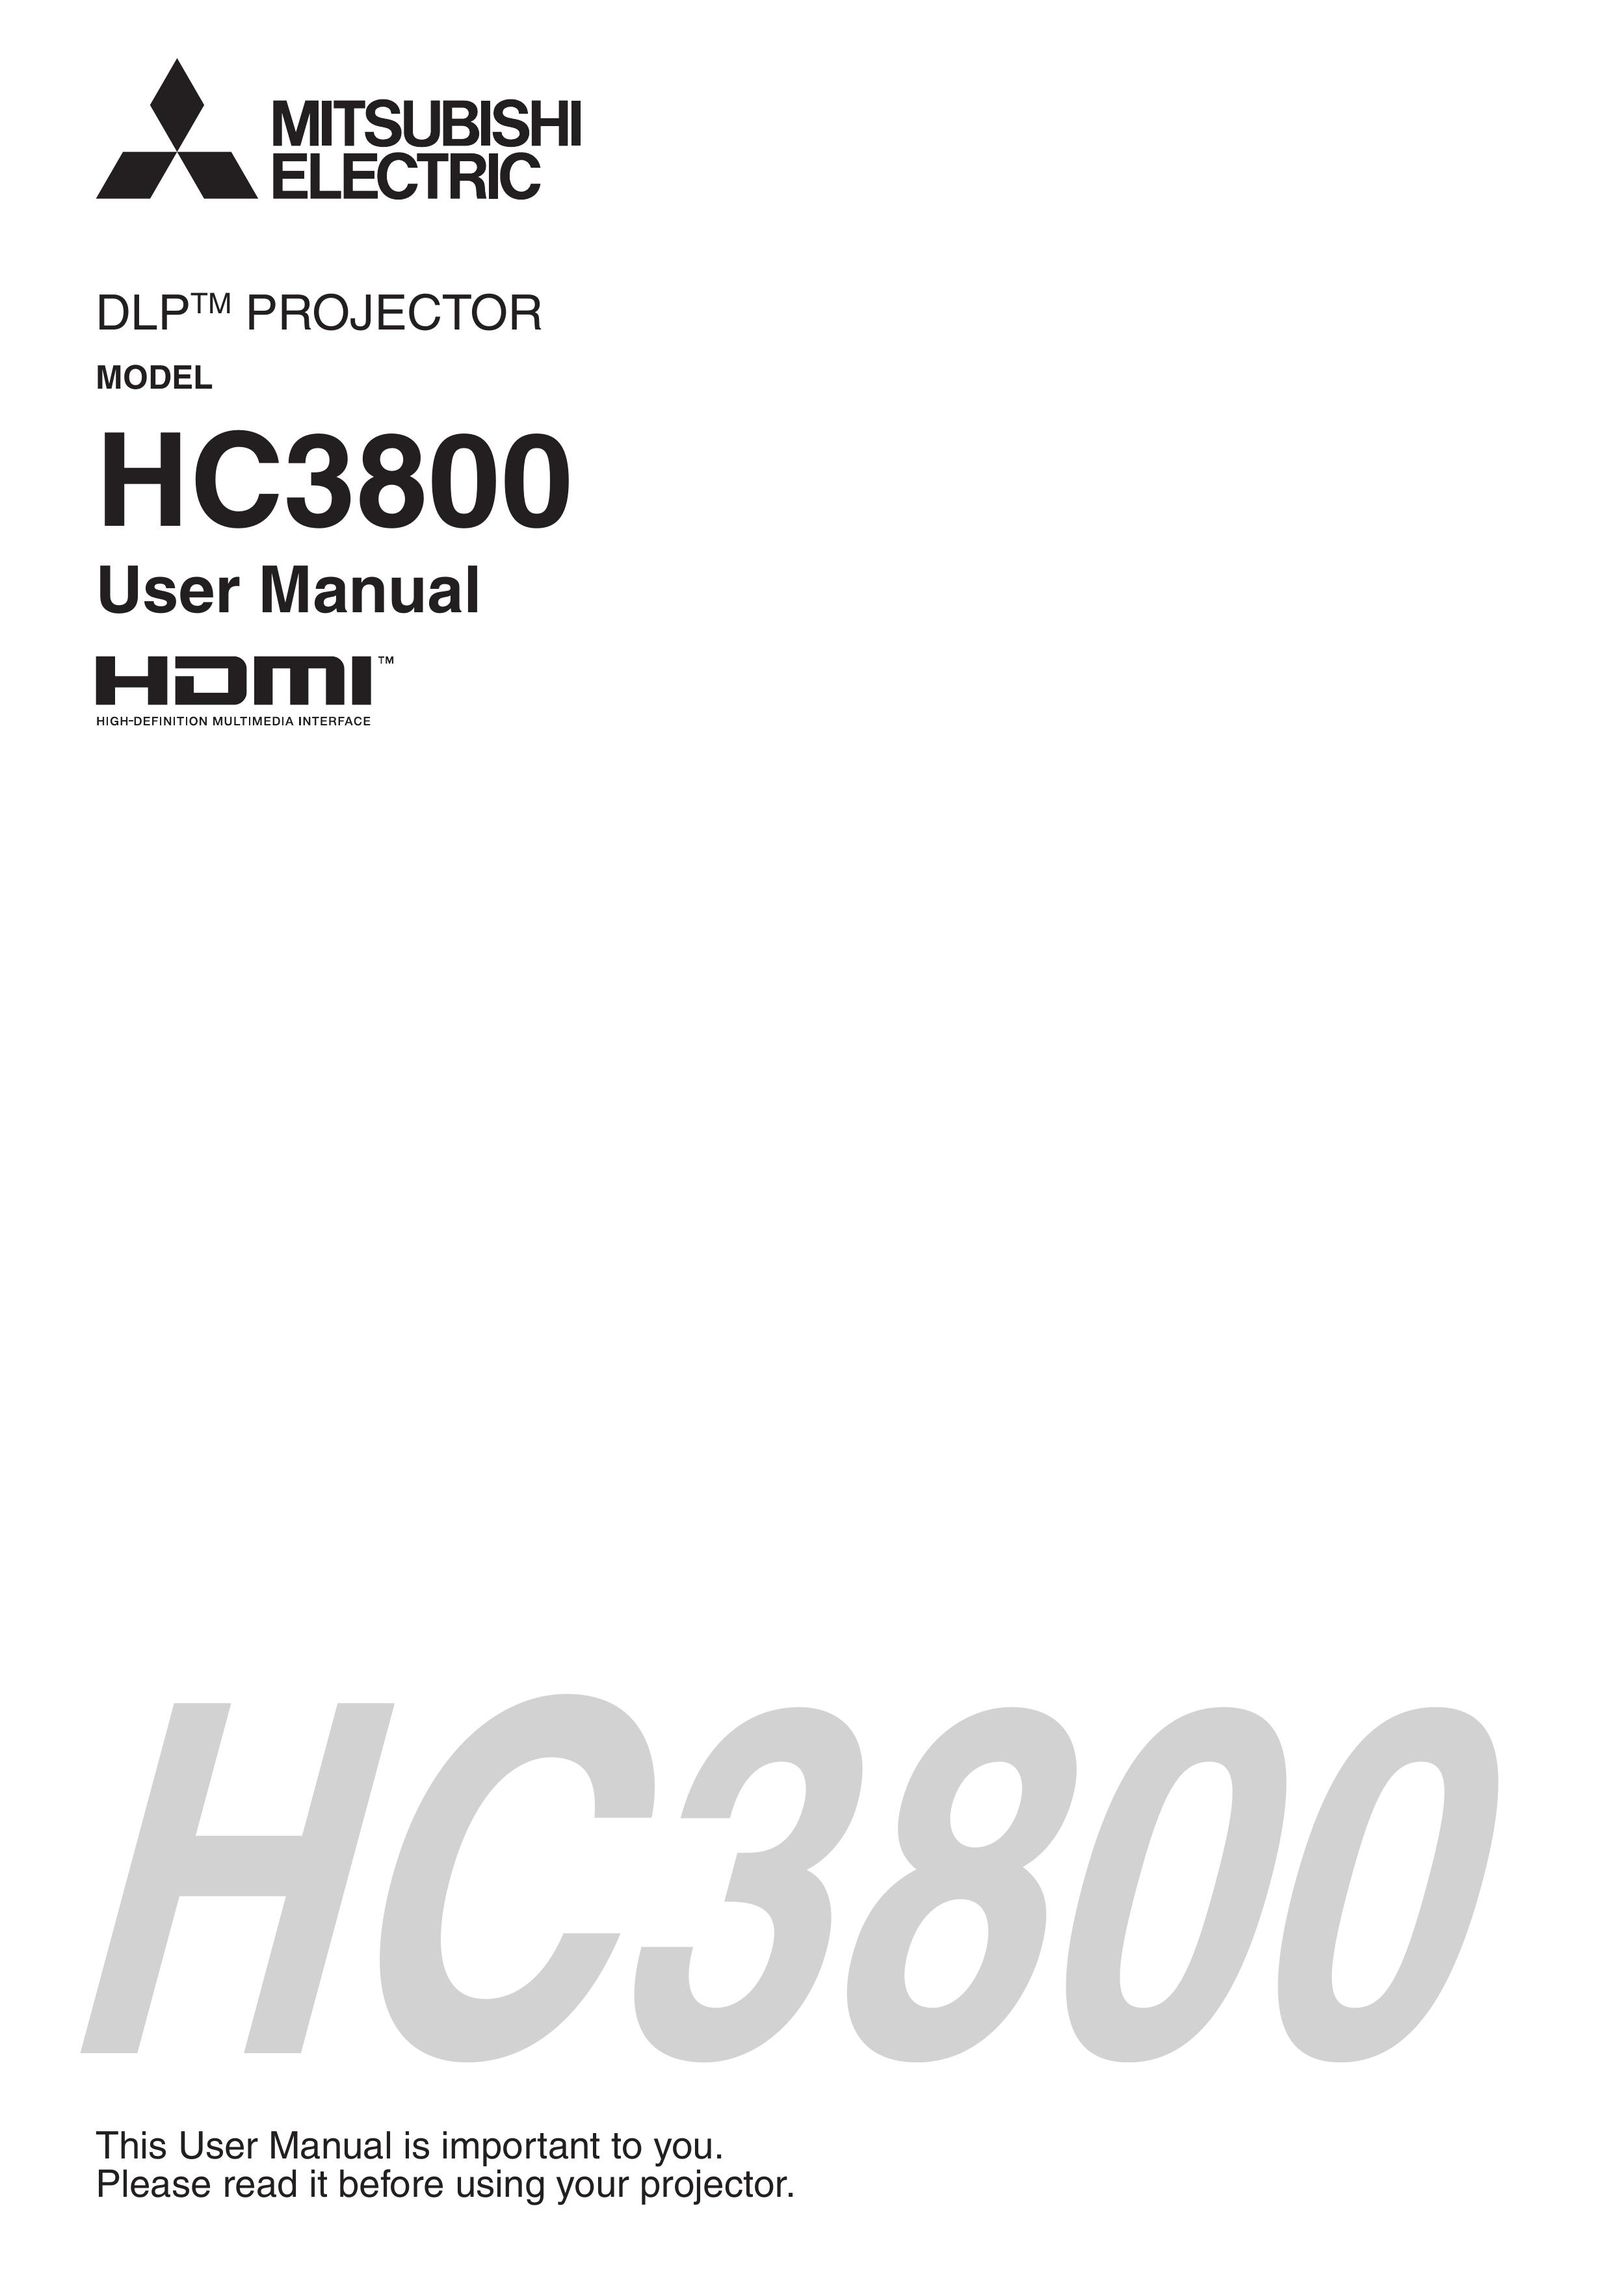 Mitsumi electronic HC3800 Projector User Manual